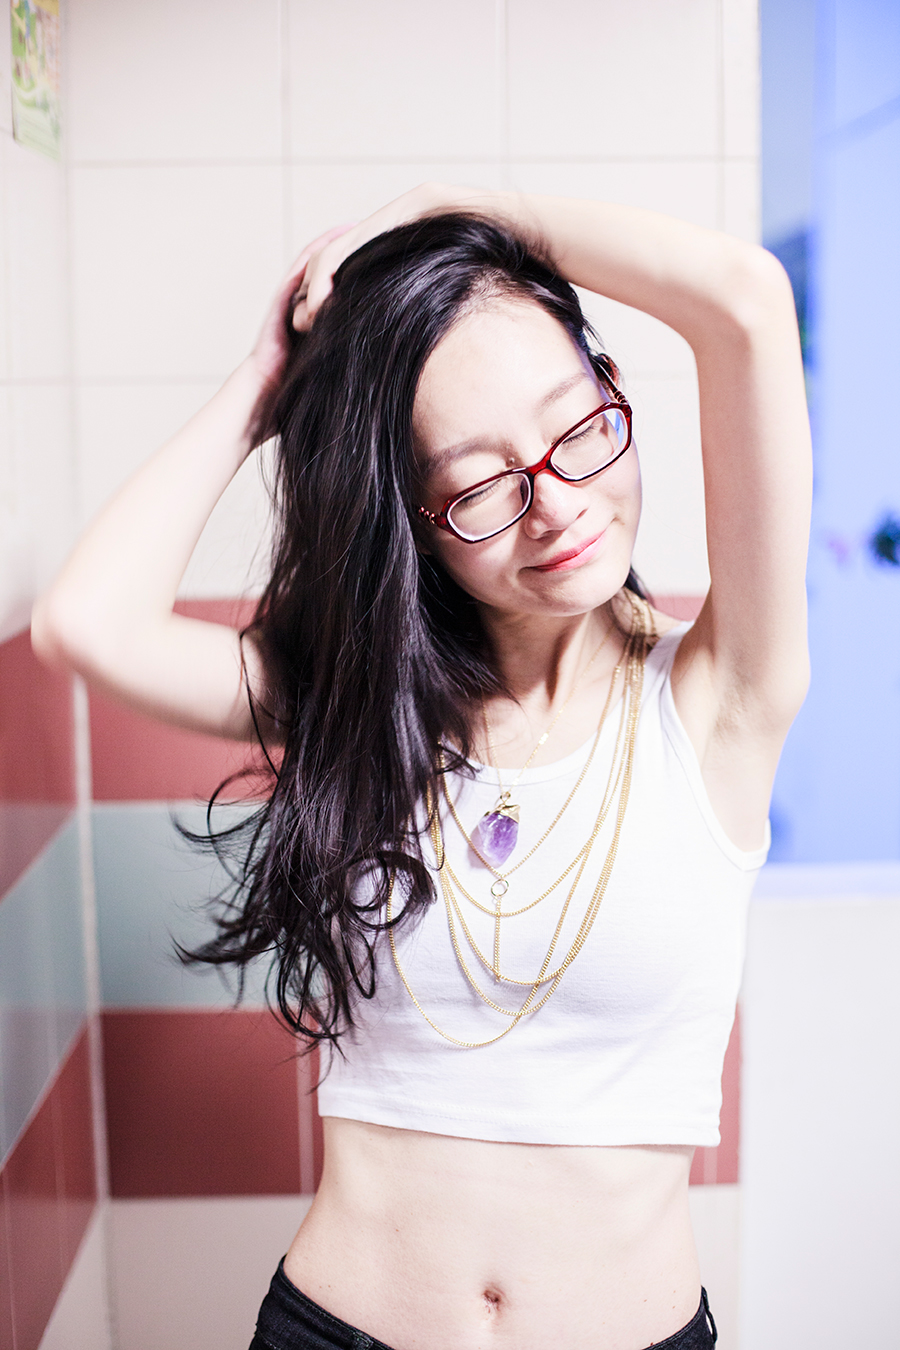 Dealsale amethyst necklace, Topshop gold bodychain as necklace, WholesaleBuying white tank crop top, Firmoo red framed glasses.